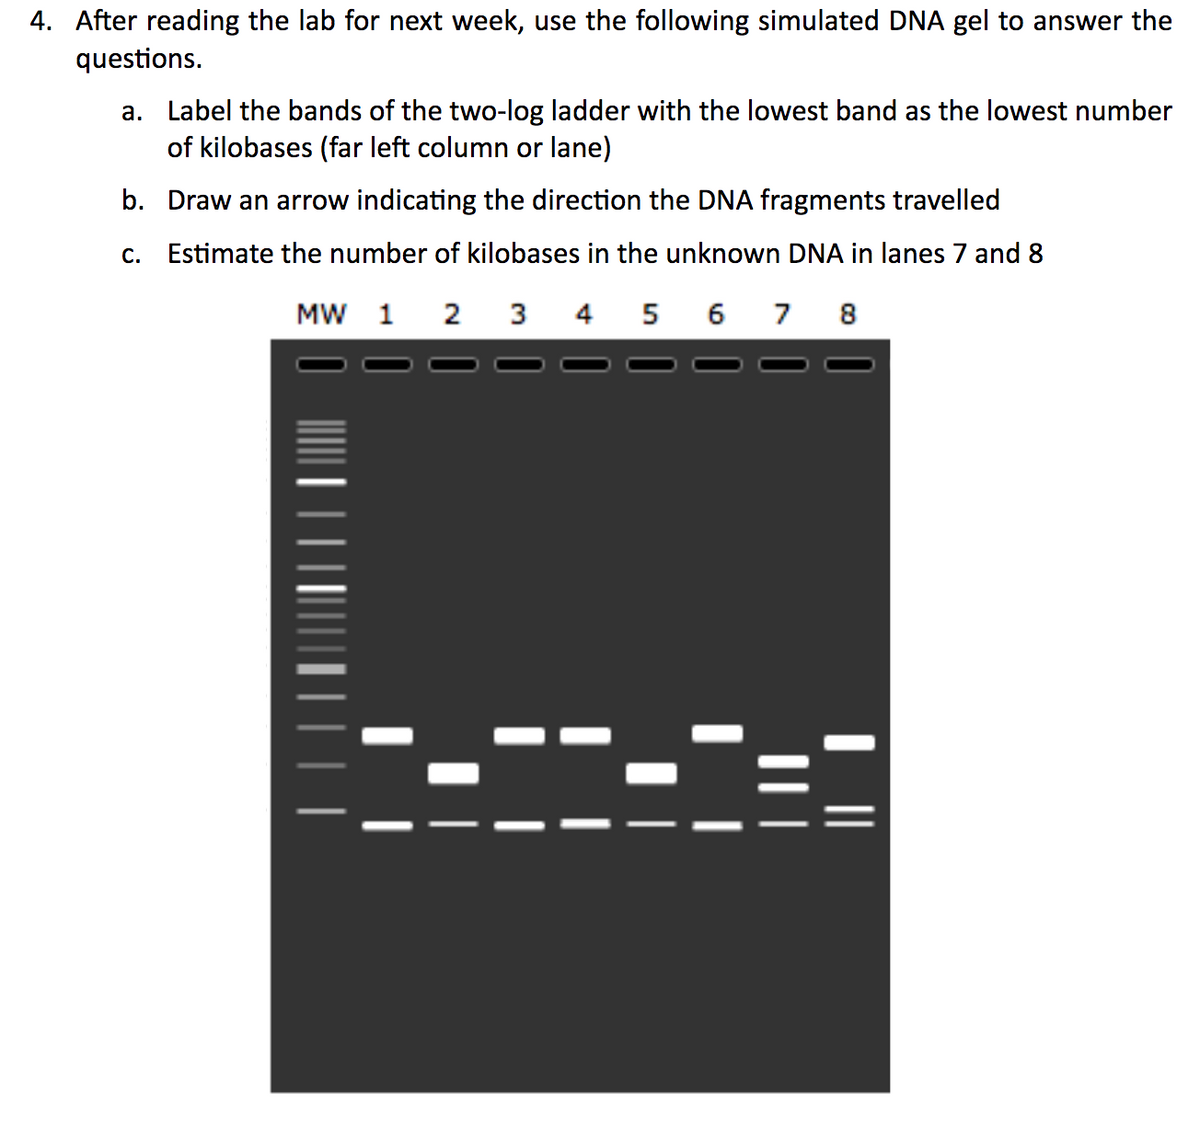 4. After reading the lab for next week, use the following simulated DNA gel to answer the
questions.
a. Label the bands of the two-log ladder with the lowest band as the lowest number
of kilobases (far left column or lane)
b. Draw an arrow indicating the direction the DNA fragments travelled
c. Estimate the number of kilobases in the unknown DNA in lanes 7 and 8
MW 1 2 3 4 5 6 7 8